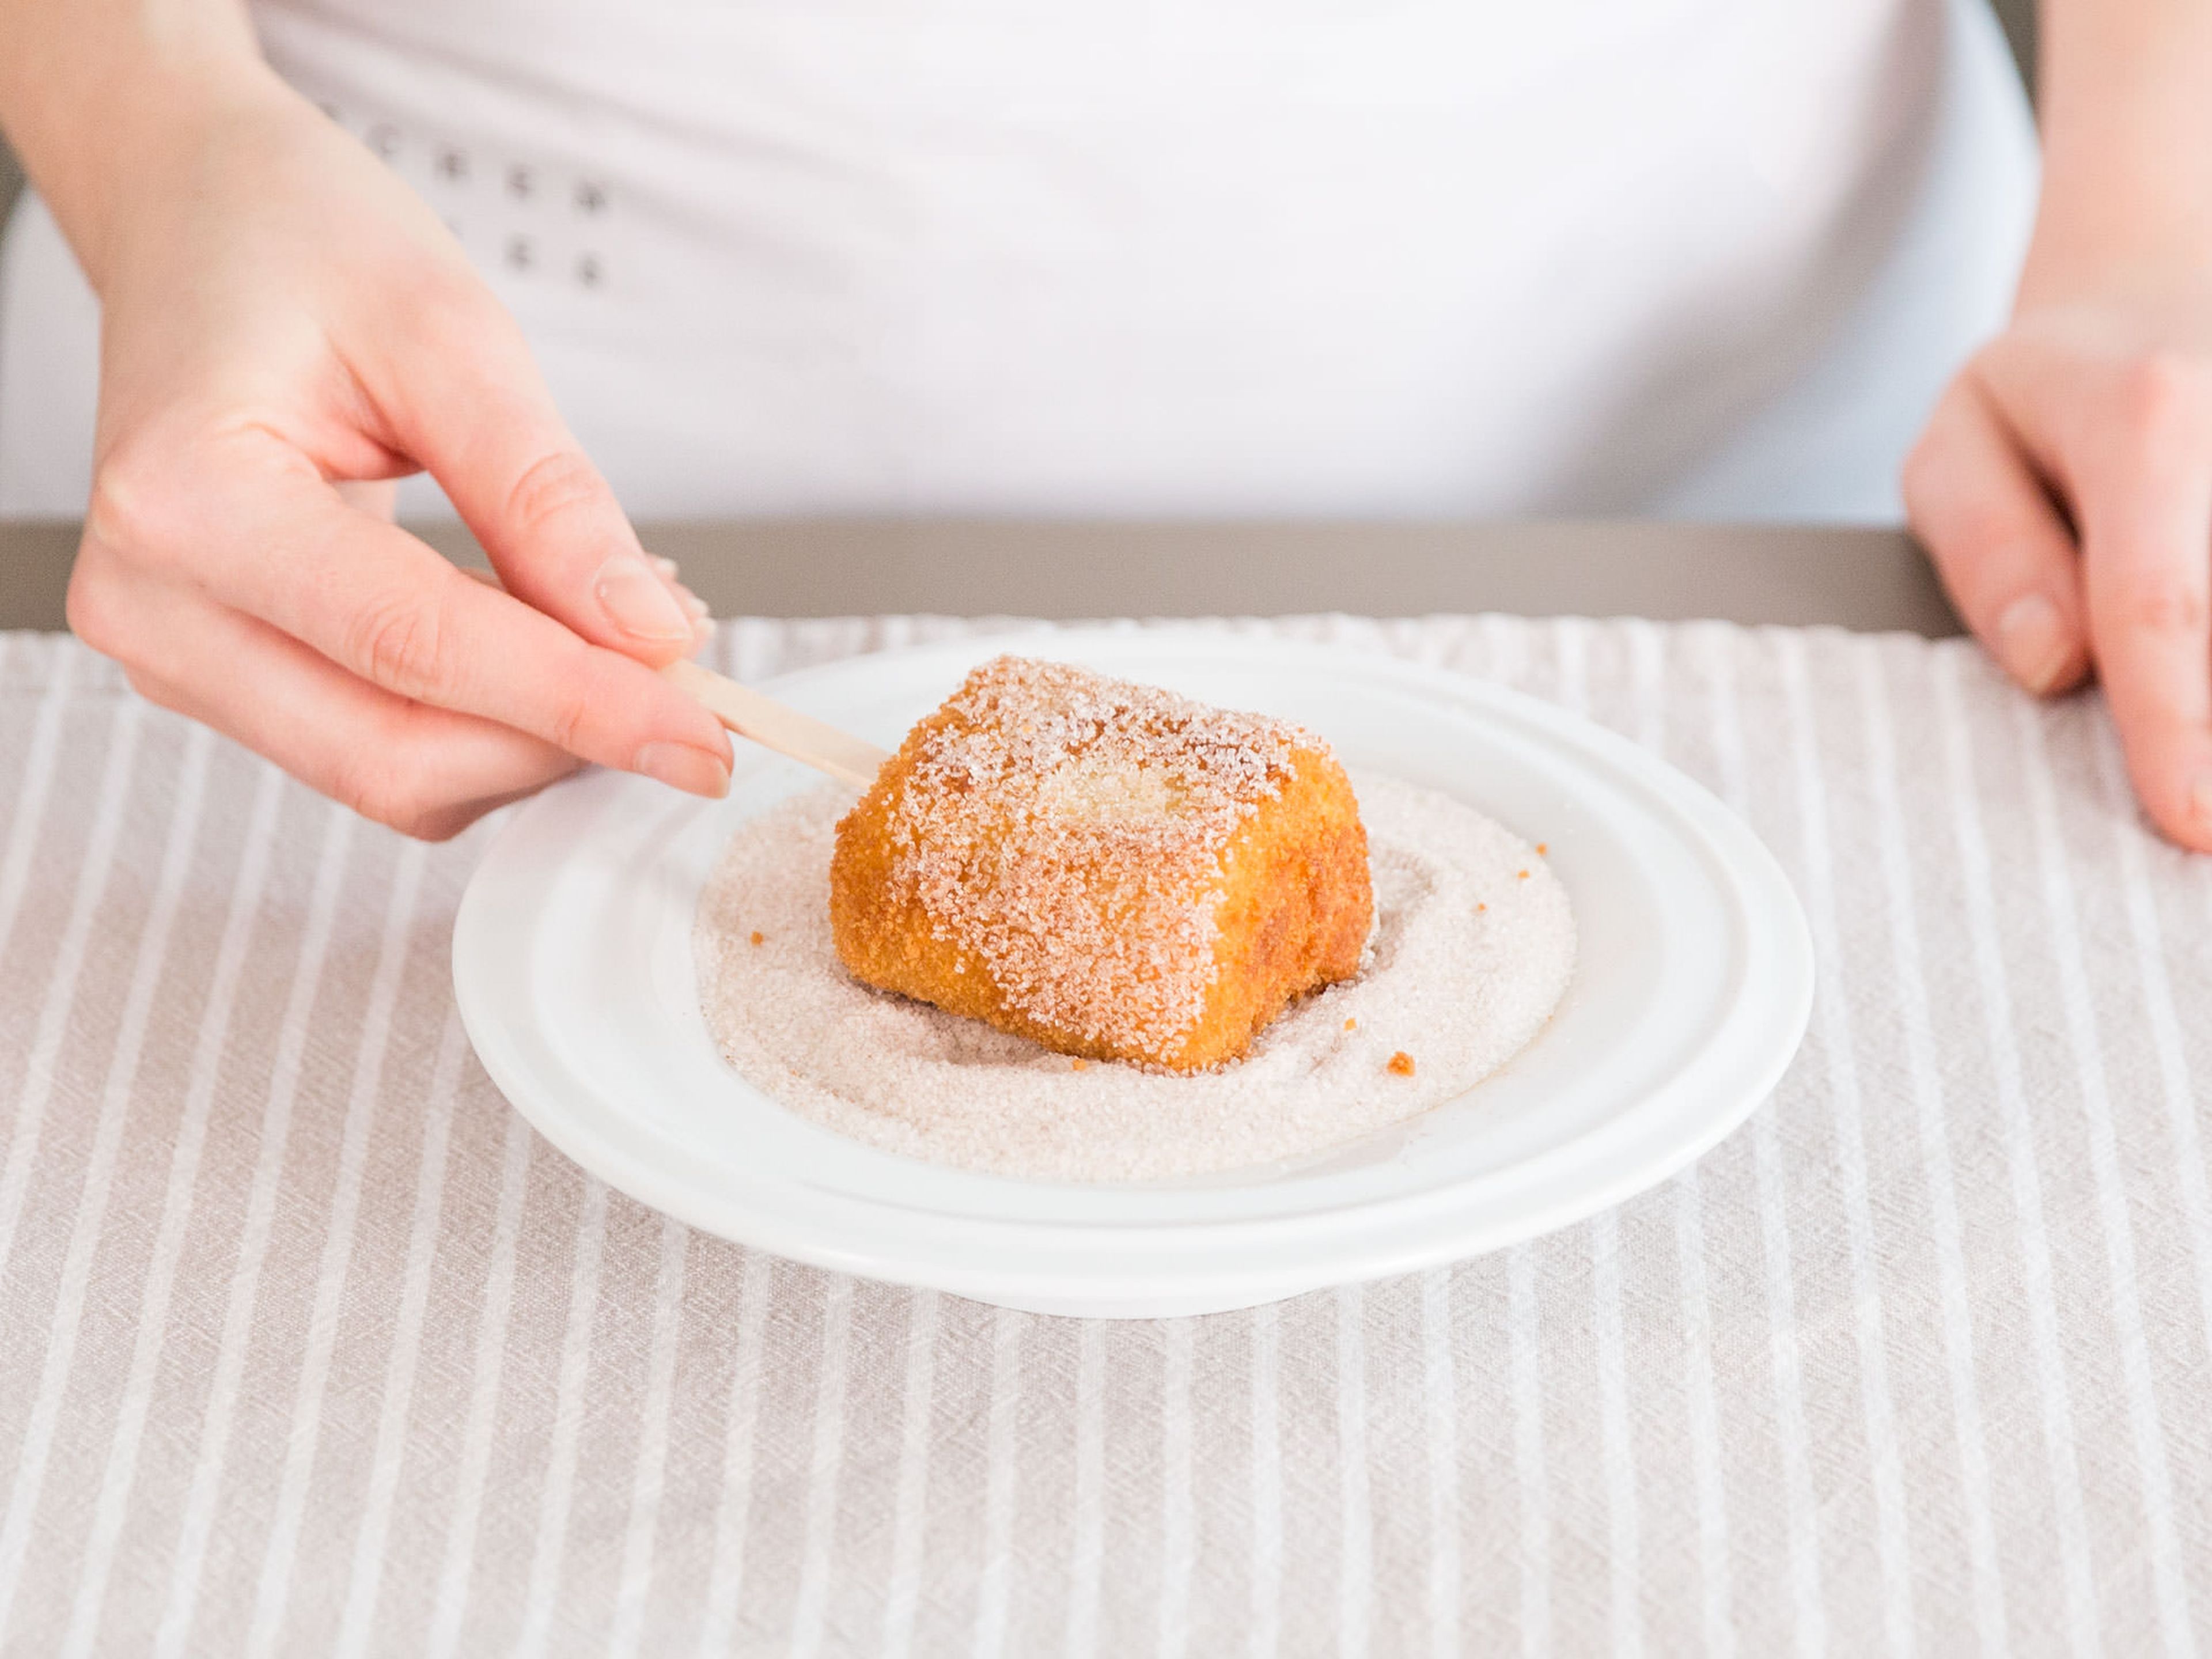 Place an ice cream stick into each fried square. Mix cinnamon and sugar in a deep plate or shallow bowl and roll each square in mixture while still warm. Enjoy!